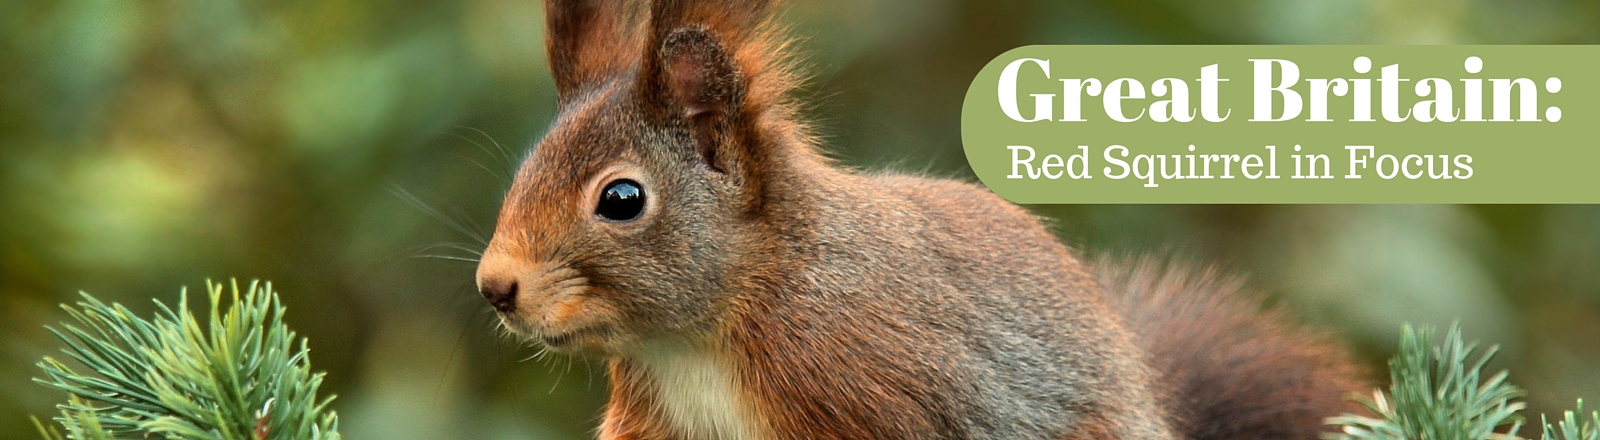 The Red Squirrel (Sciurus Vulgaris) is near absent in the South of England, with declining numbers in the North of Scotland. National Parks Guy